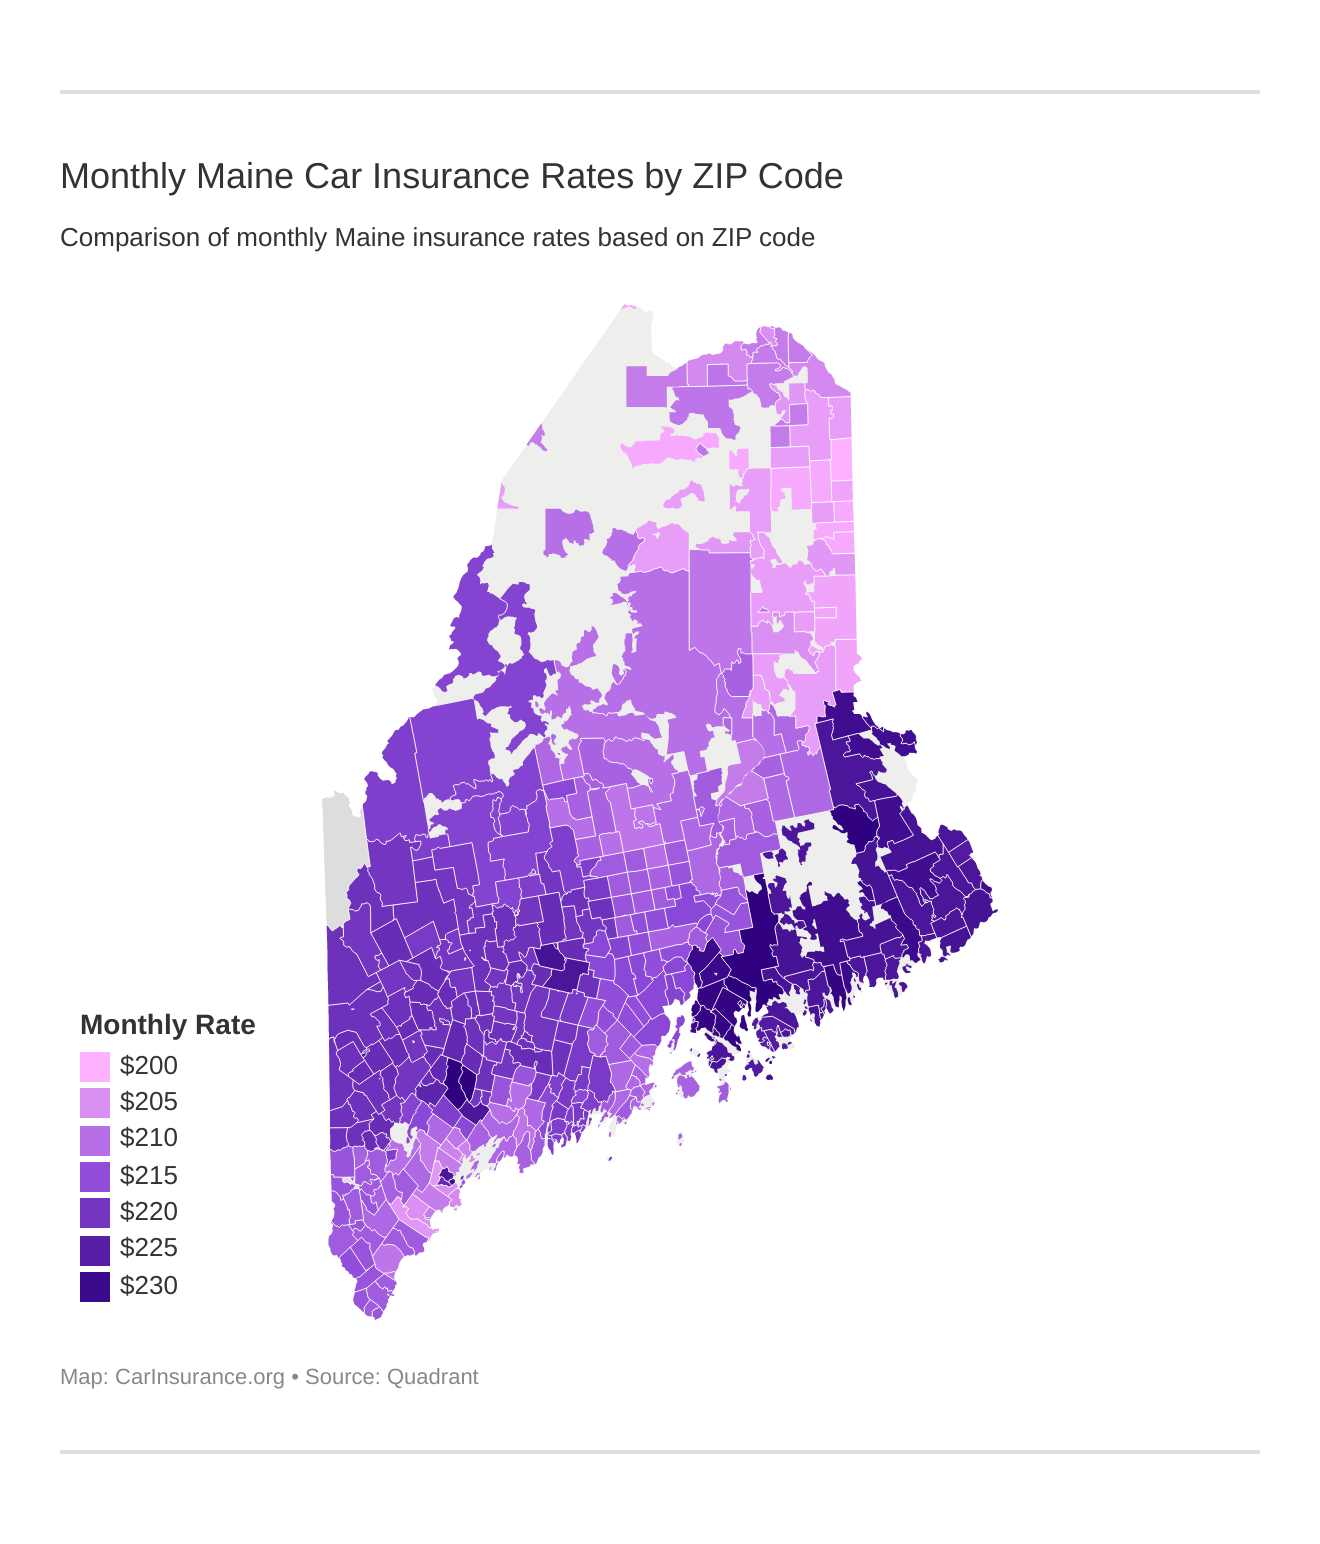 Monthly Maine Car Insurance Rates by ZIP Code